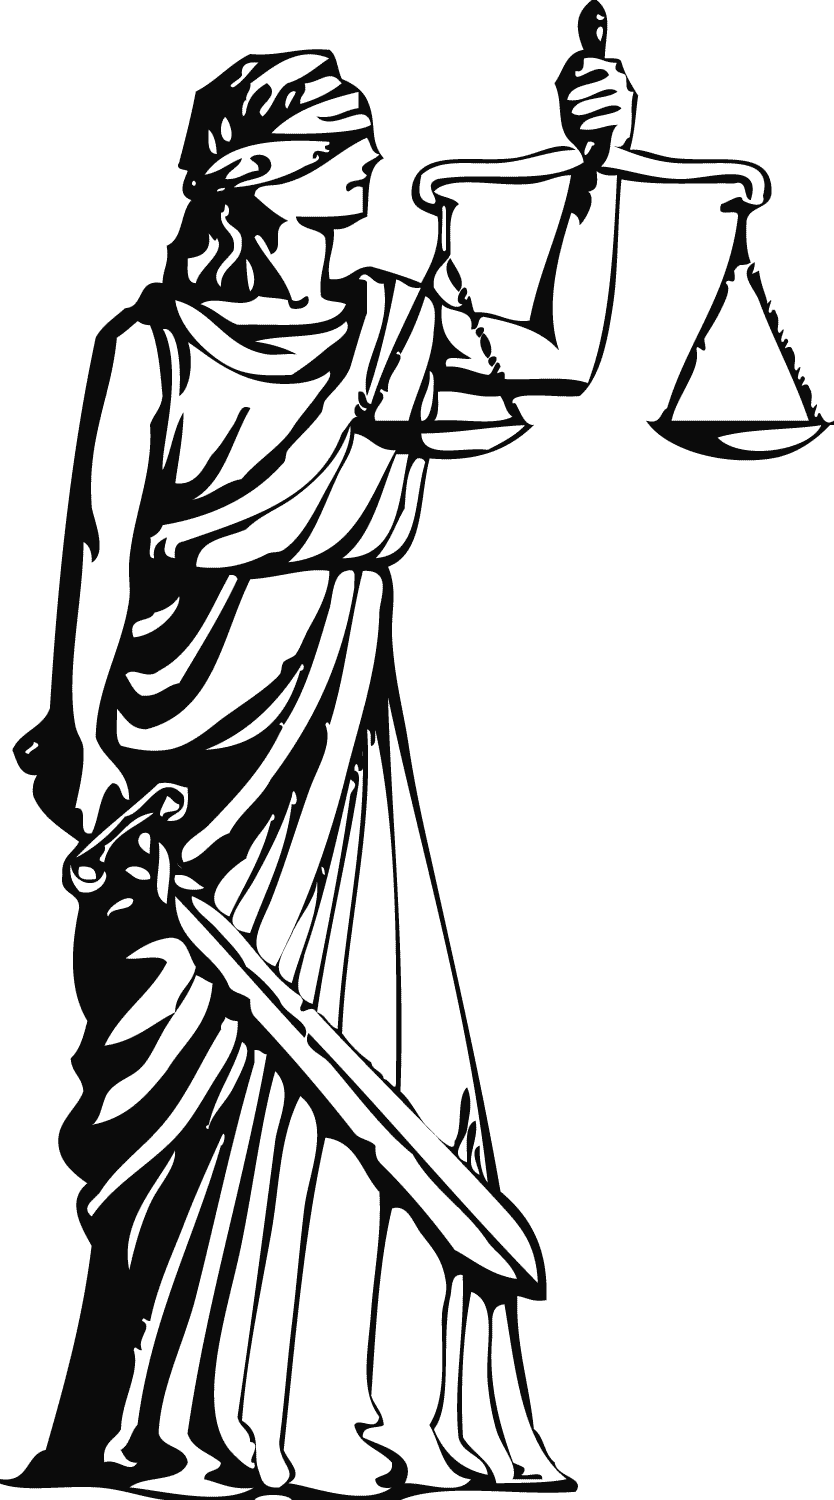 Lawyers to file overturn. Legal clipart justice